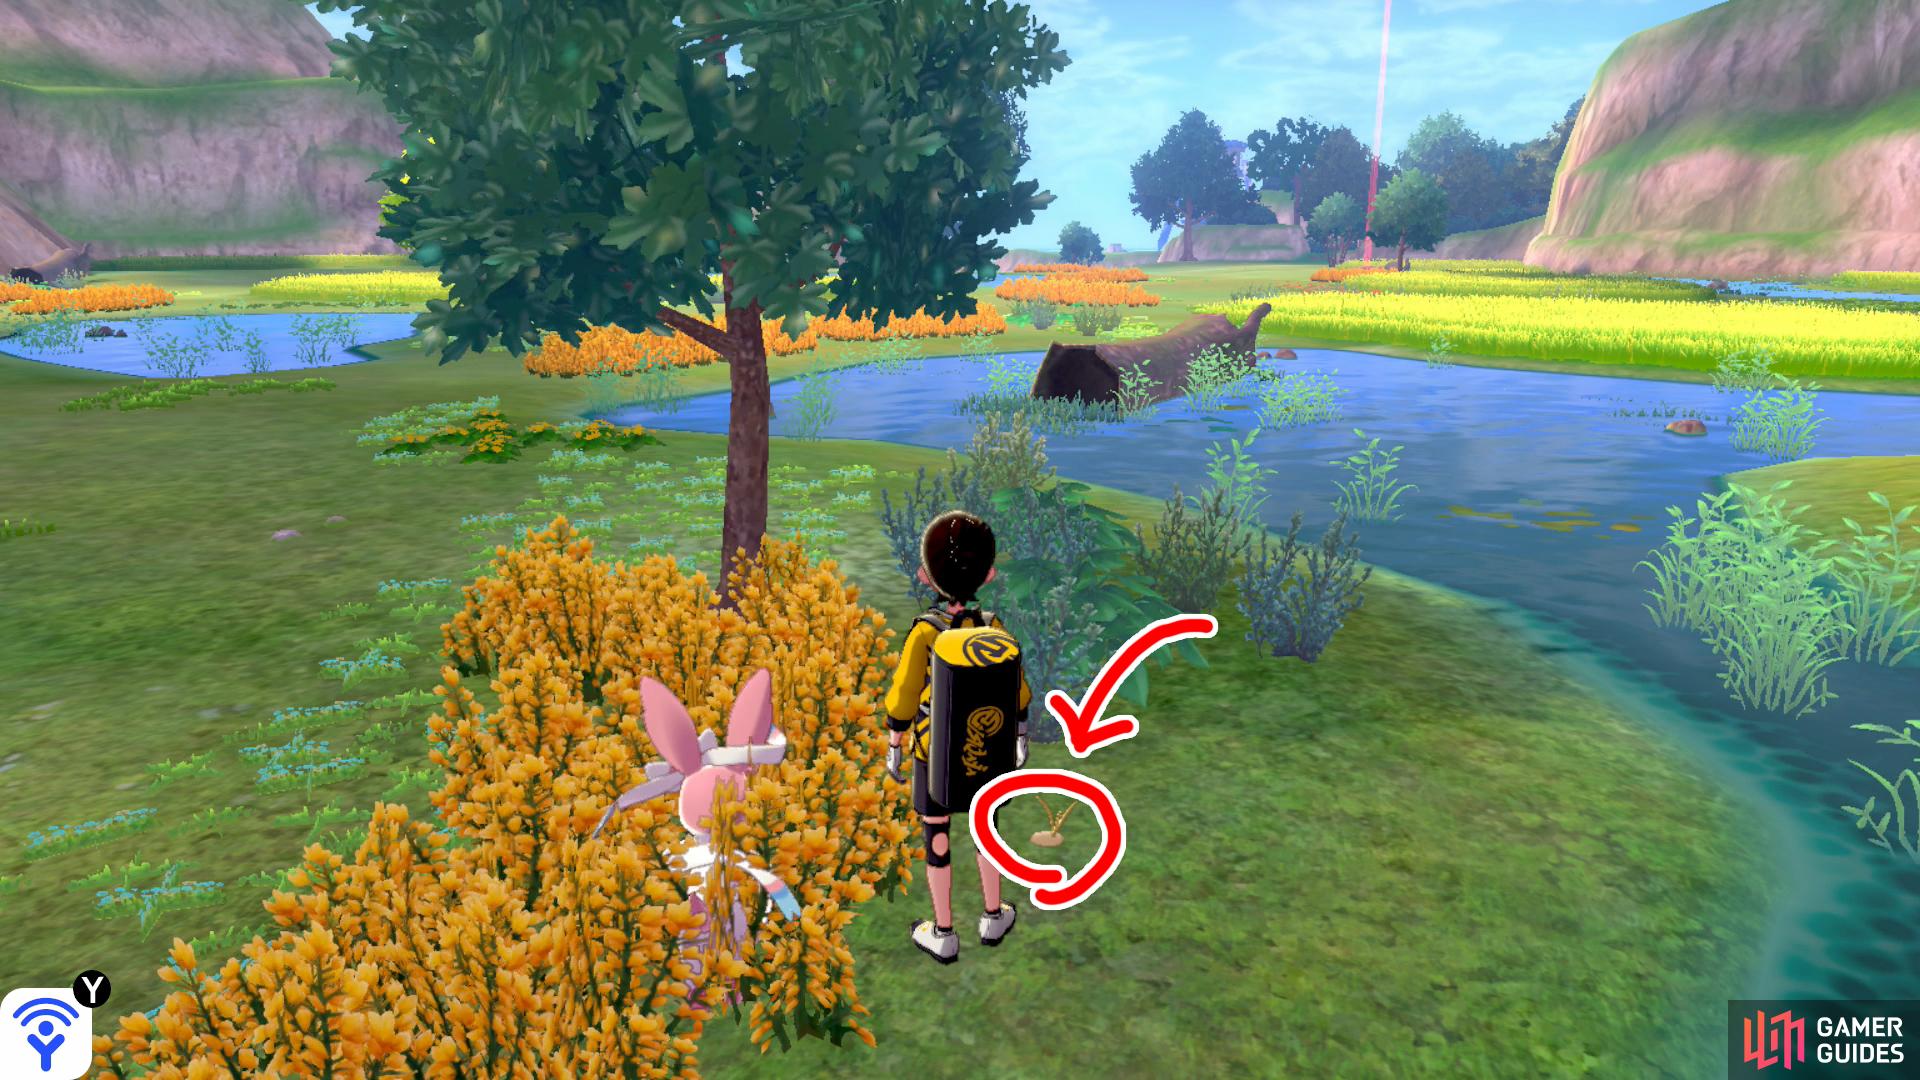 2/20: From Fields of Honor entrance, head towards the central pool directly ahead. This Diglett's behind the tall yellow grass that's in front of the pool, near the Pokémon Den.